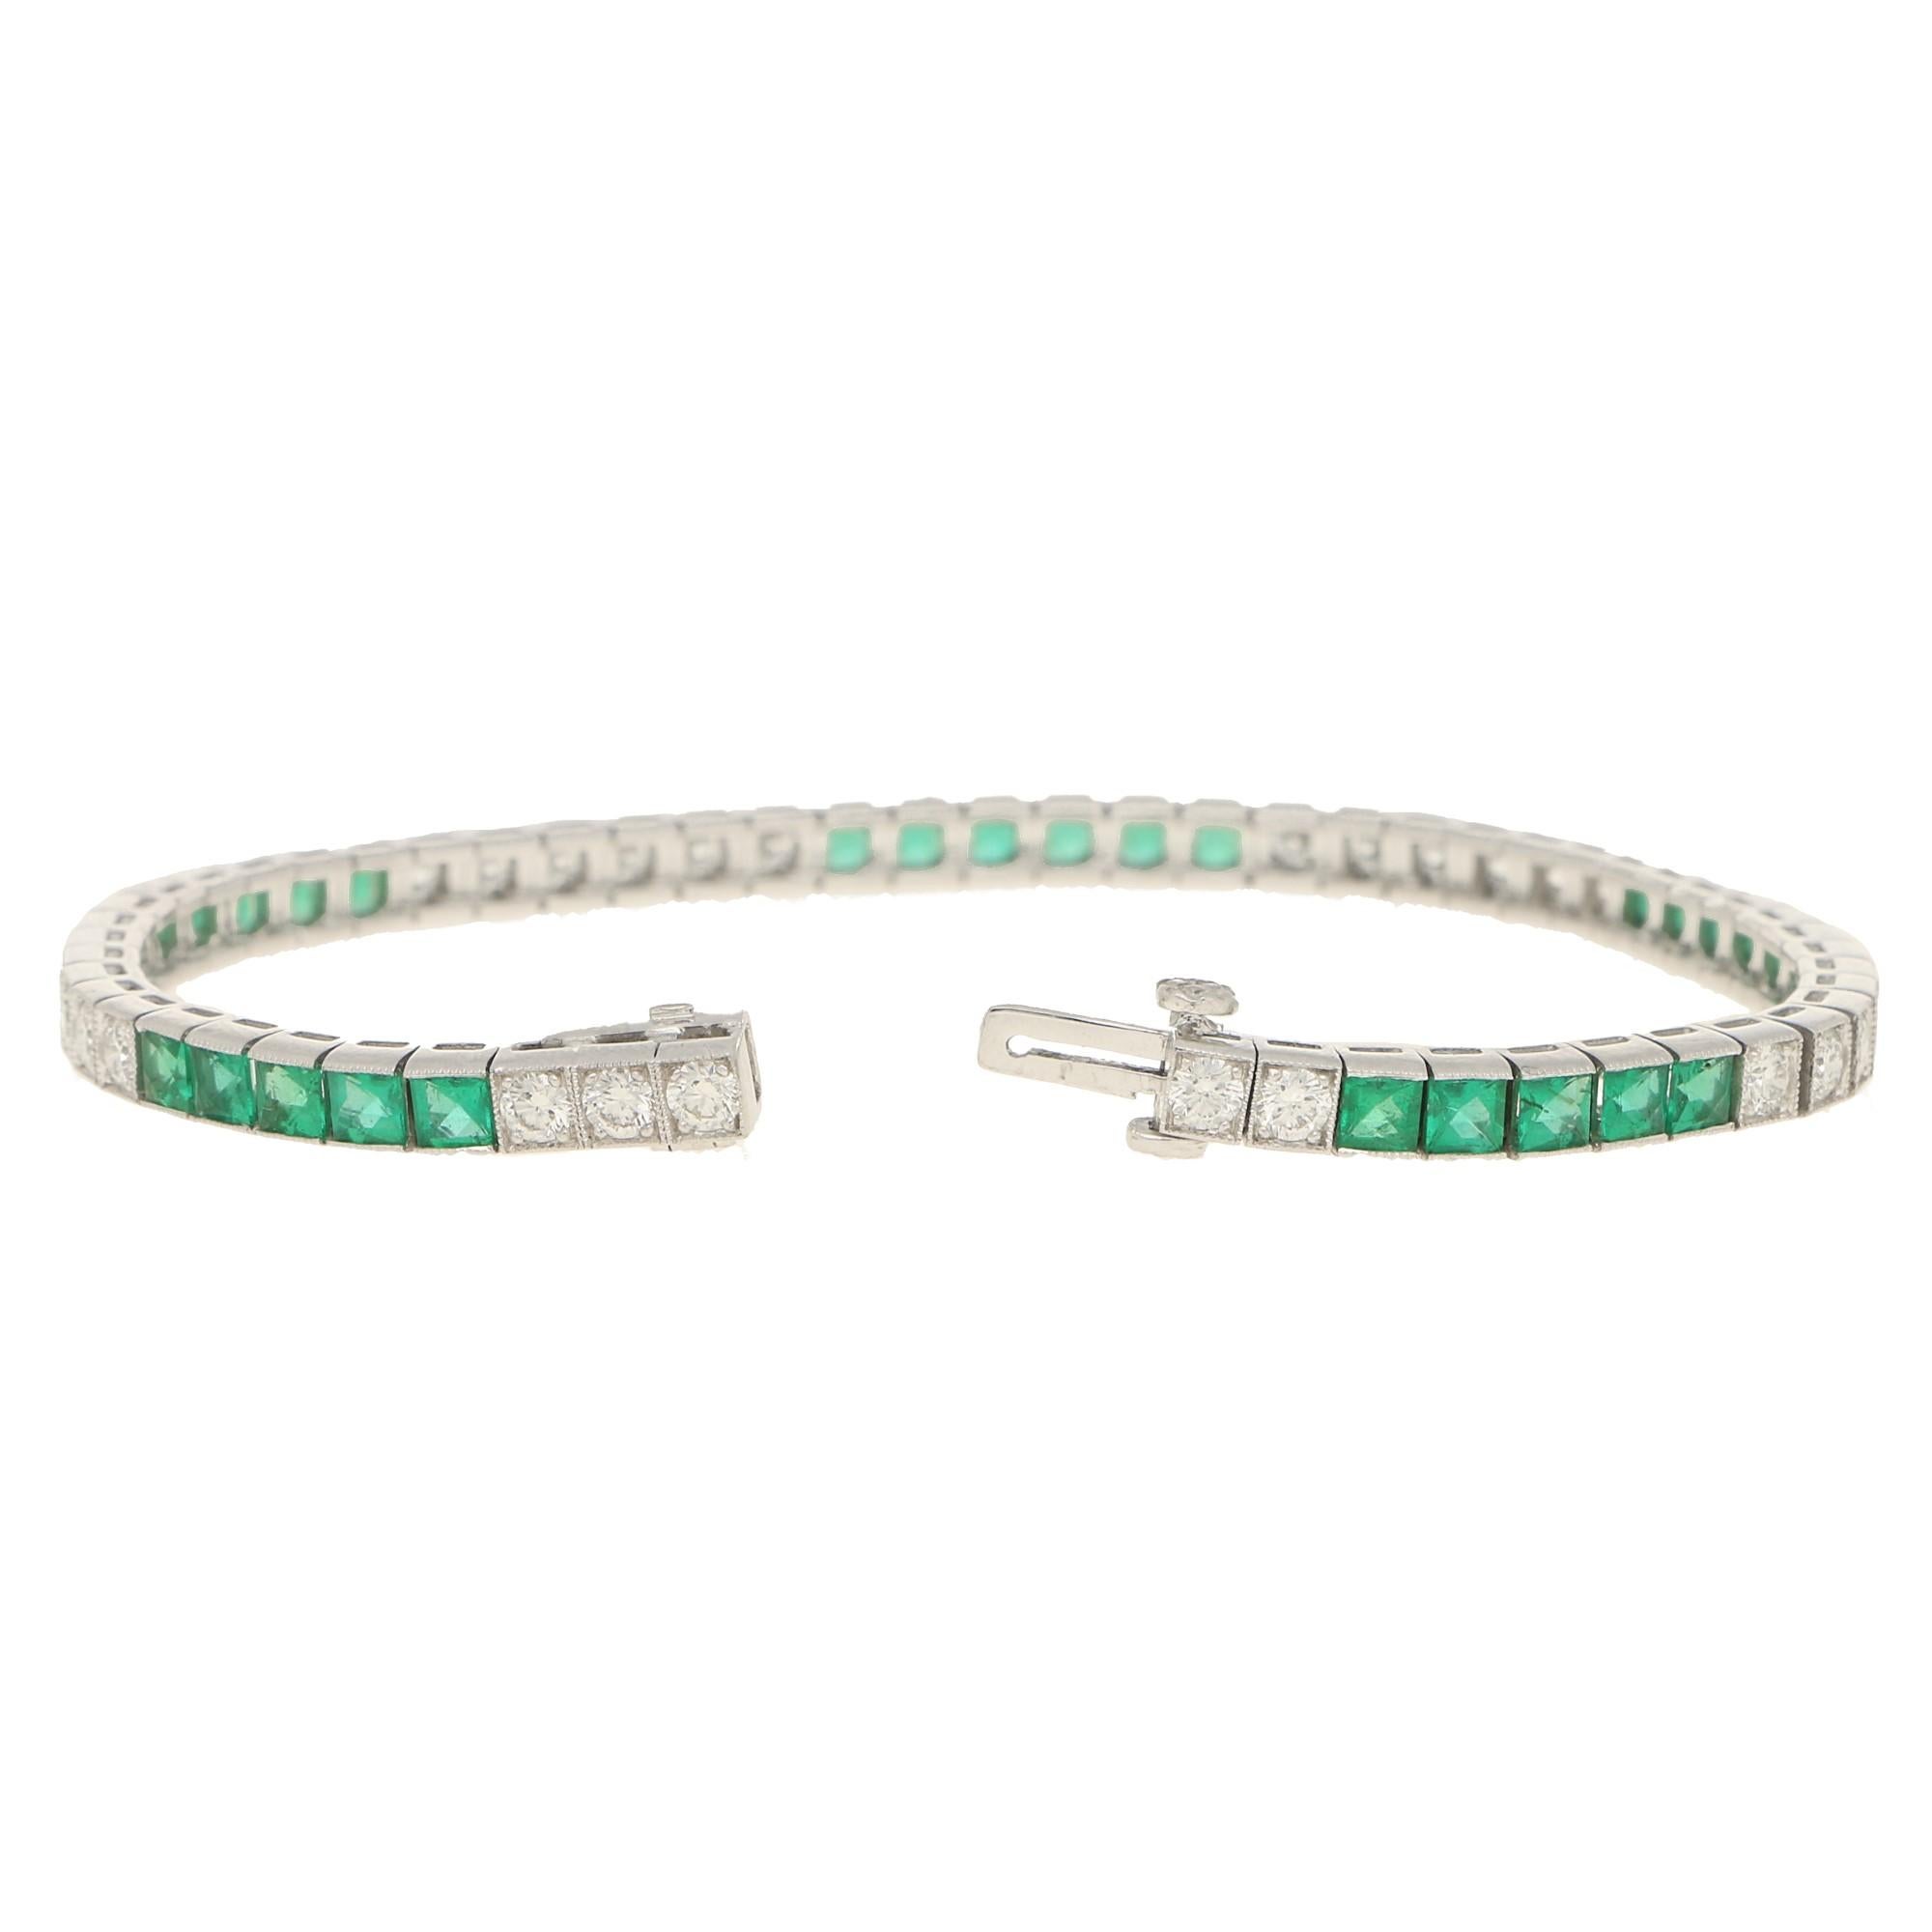 A beautiful Art Deco inspired emerald and diamond line bracelet set in platinum.

This stunning bracelet is composed of a perfectly balanced mixture of French cut emeralds and round brilliant cut diamonds; all of which are rub over set individually